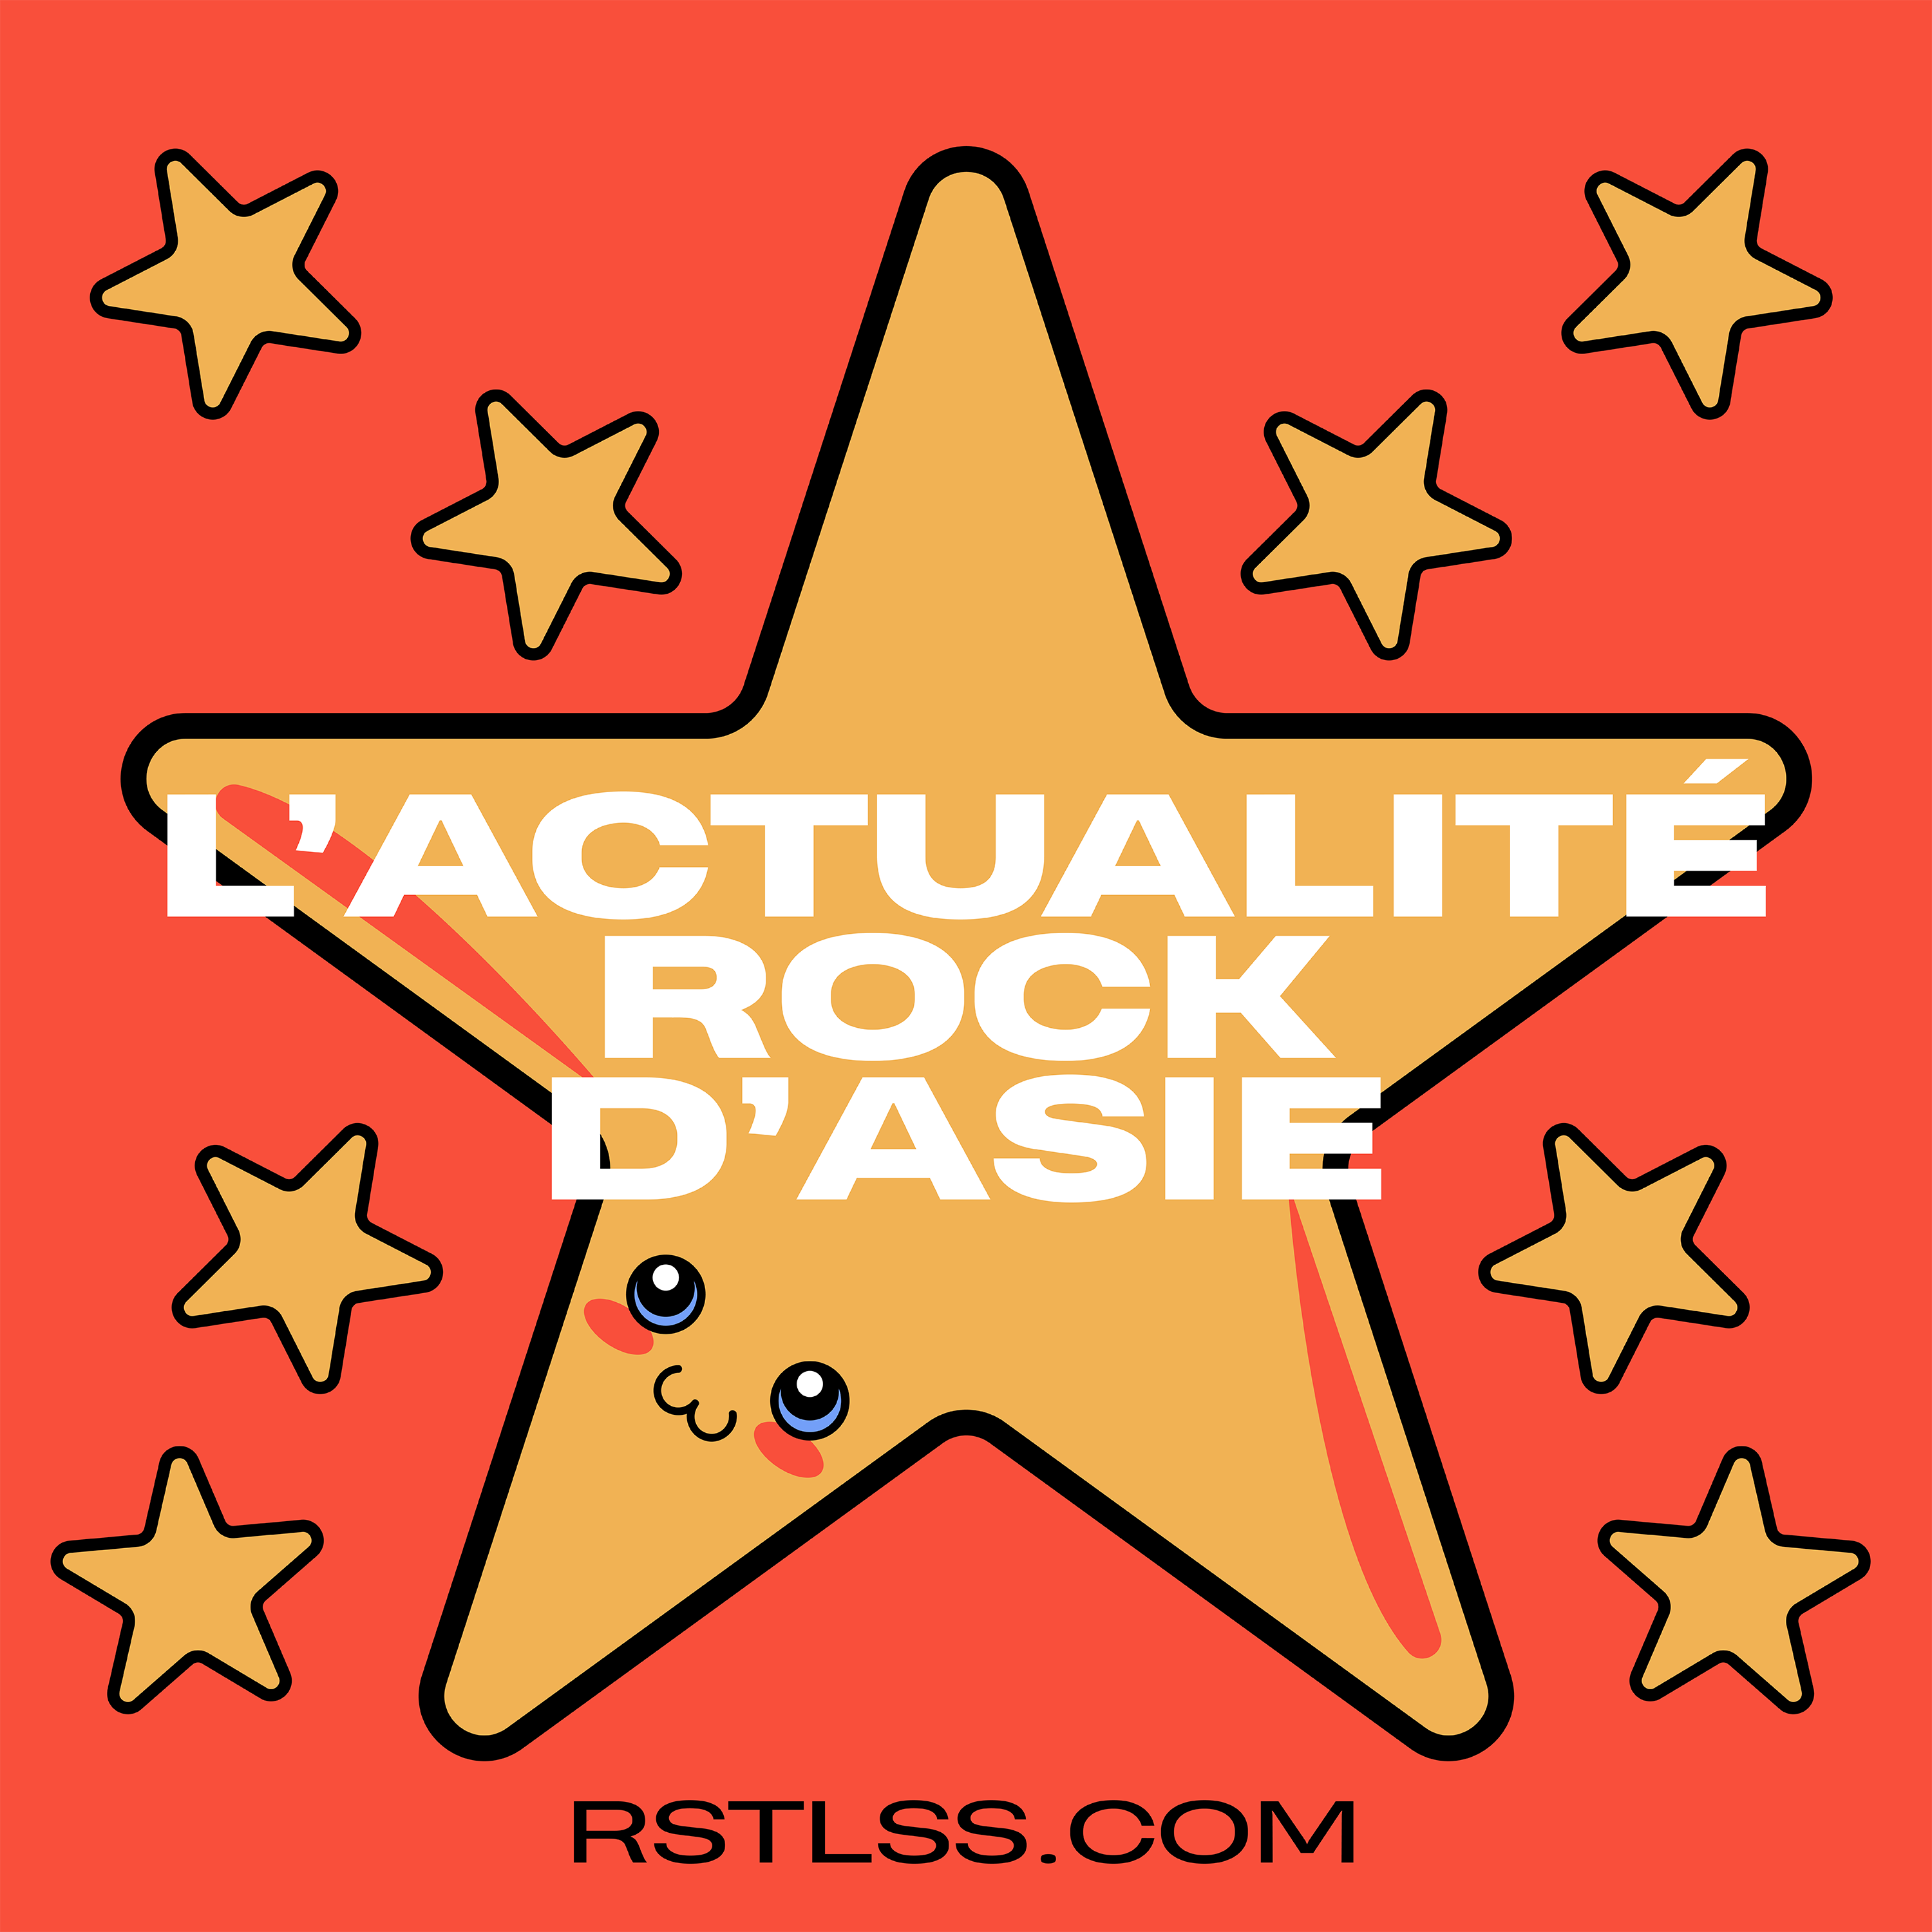 L’ACTUALITÉ ROCK D’ASIE #26 - When Chai Met Toast "Maybe I Can Fly"